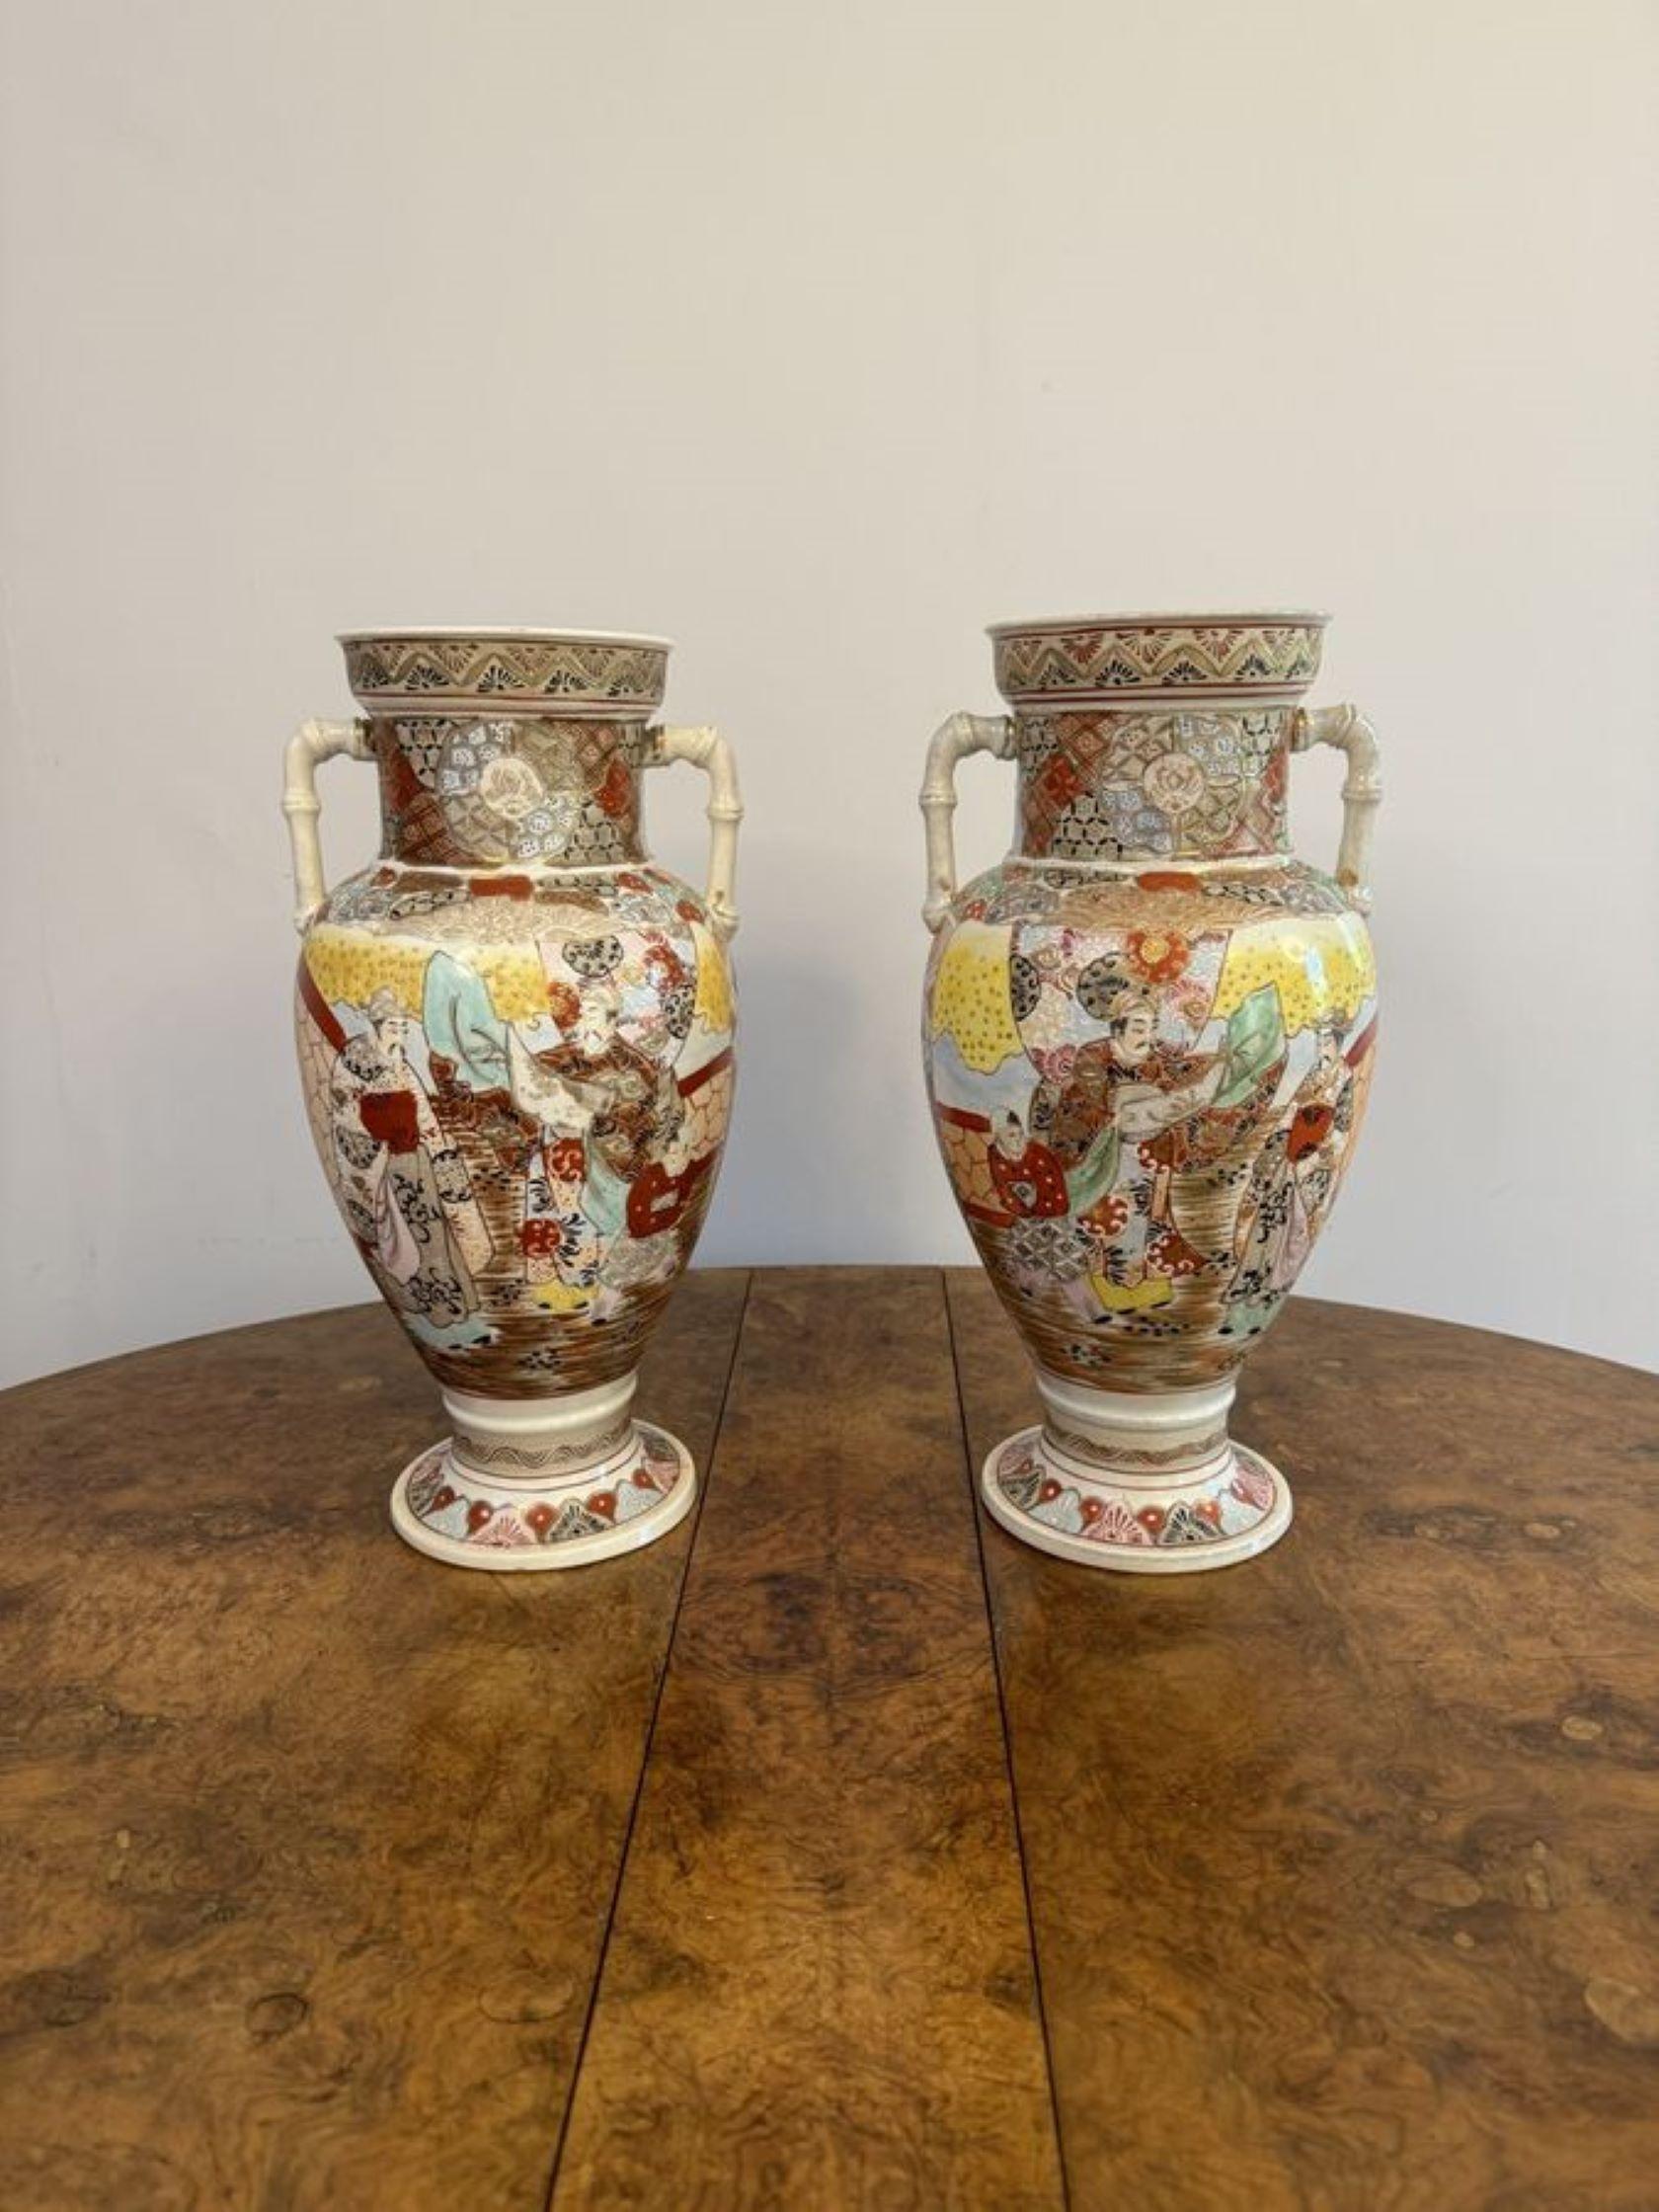 Quality pair of large antique Japanese satsuma vases, having a quality pair of large antique Satsuma vases with twin handles to the top, hand painted in stunning red, yellow, black, green, blue and gold colours raised on circular bases.

D. 1900
